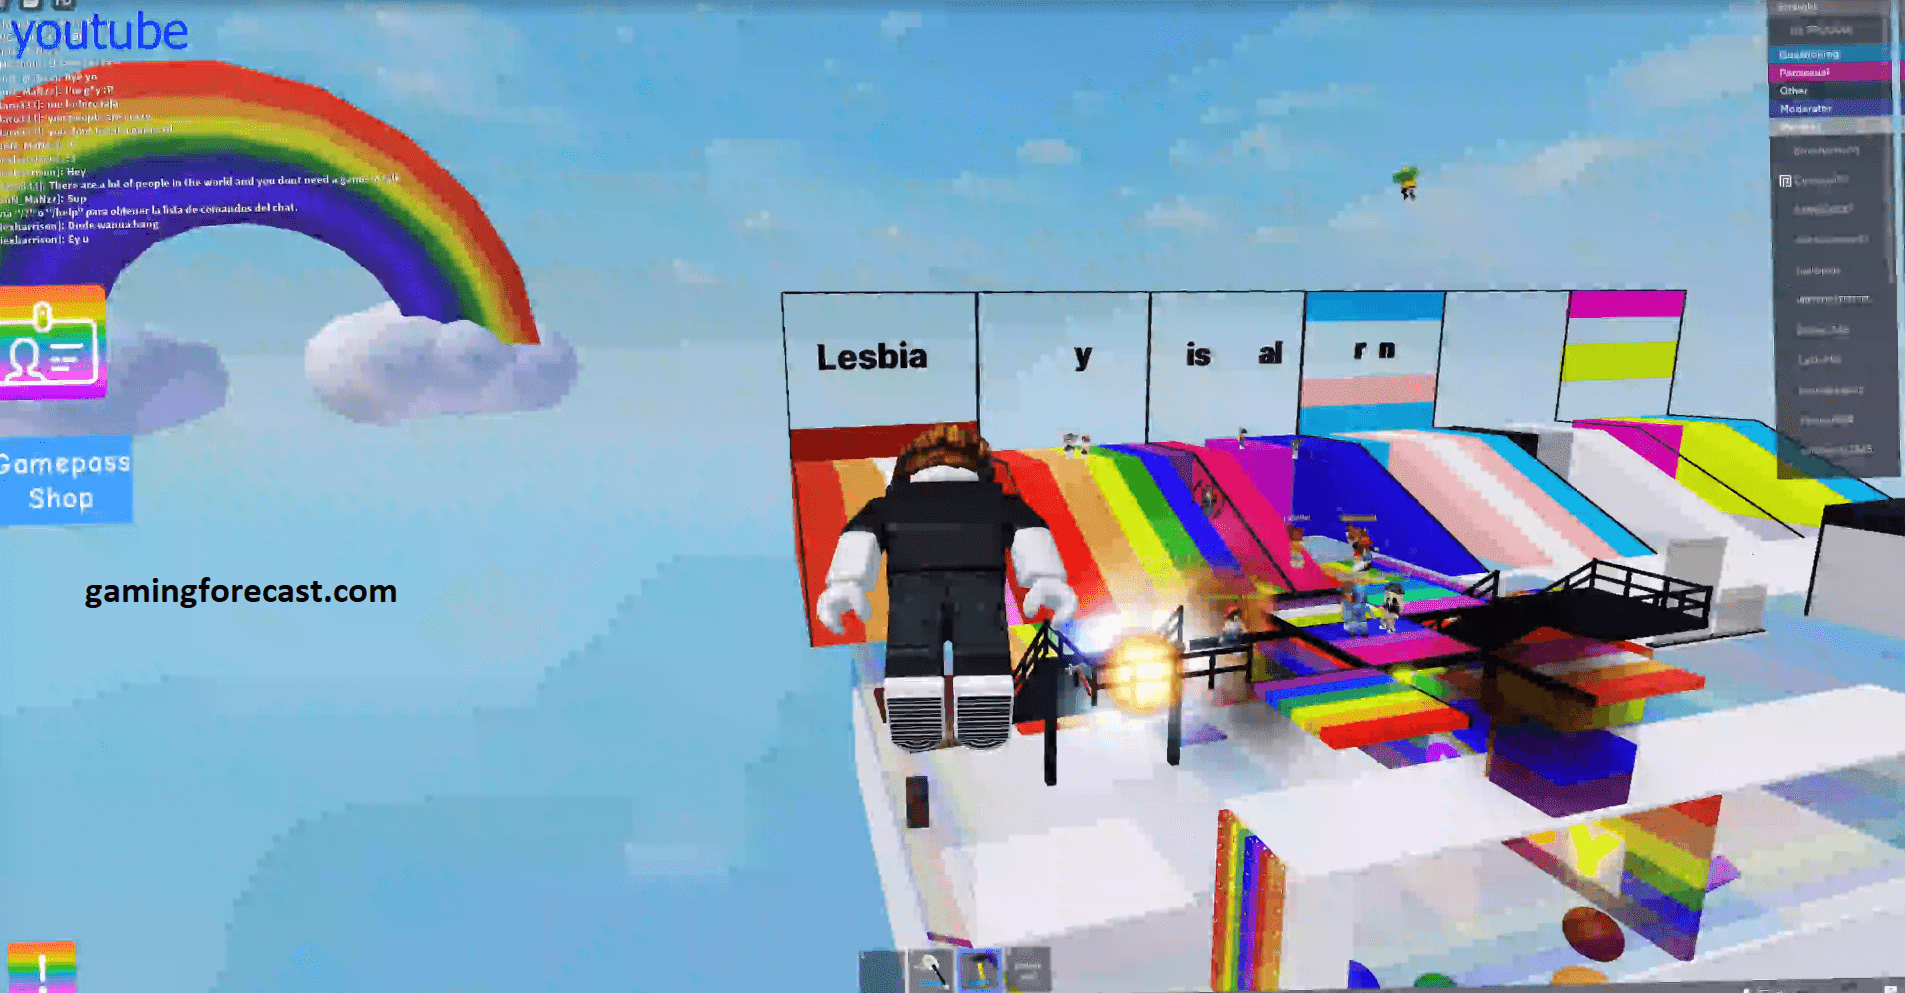 Roblox Hack Download Pc Destroy Lobby Fly Aimbot Scripts 2021 Gaming Forecast Download Free Online Game Hacks - roblox cheats and hacks download